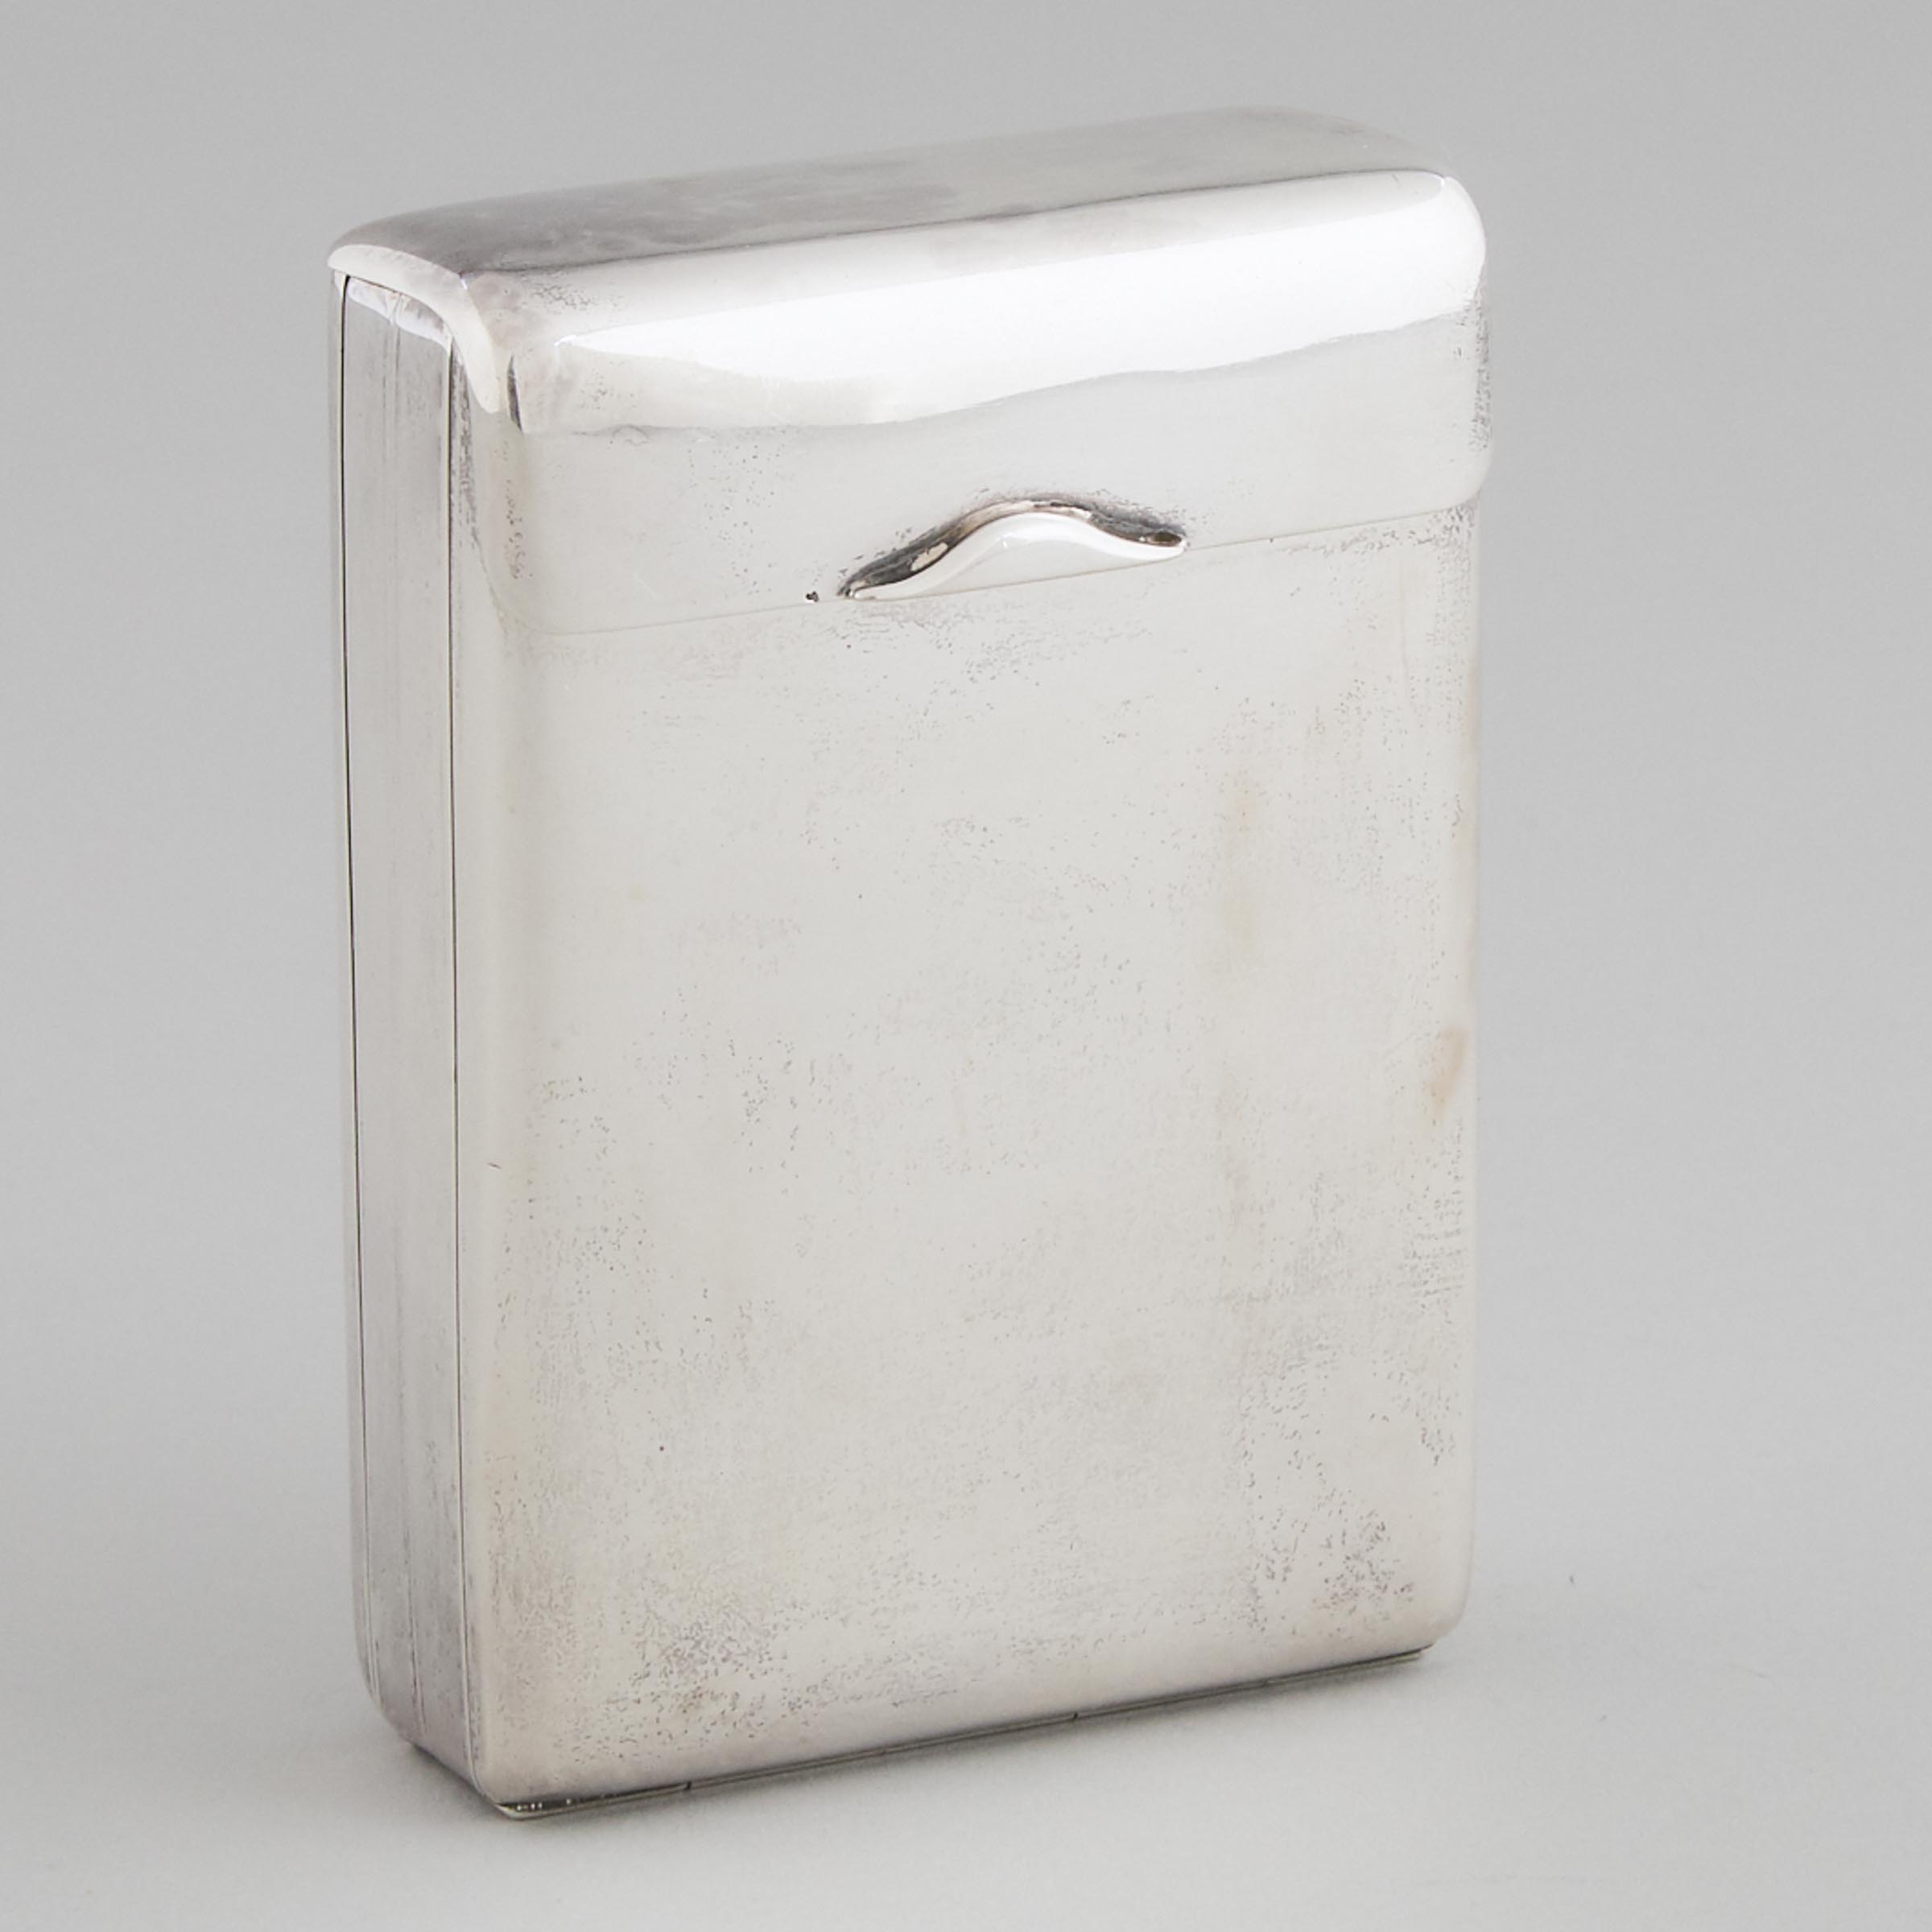 American Silver Four-Section Folding Cigarette Case, Mauser Mfg. Co., New York, N.Y., early 20th century